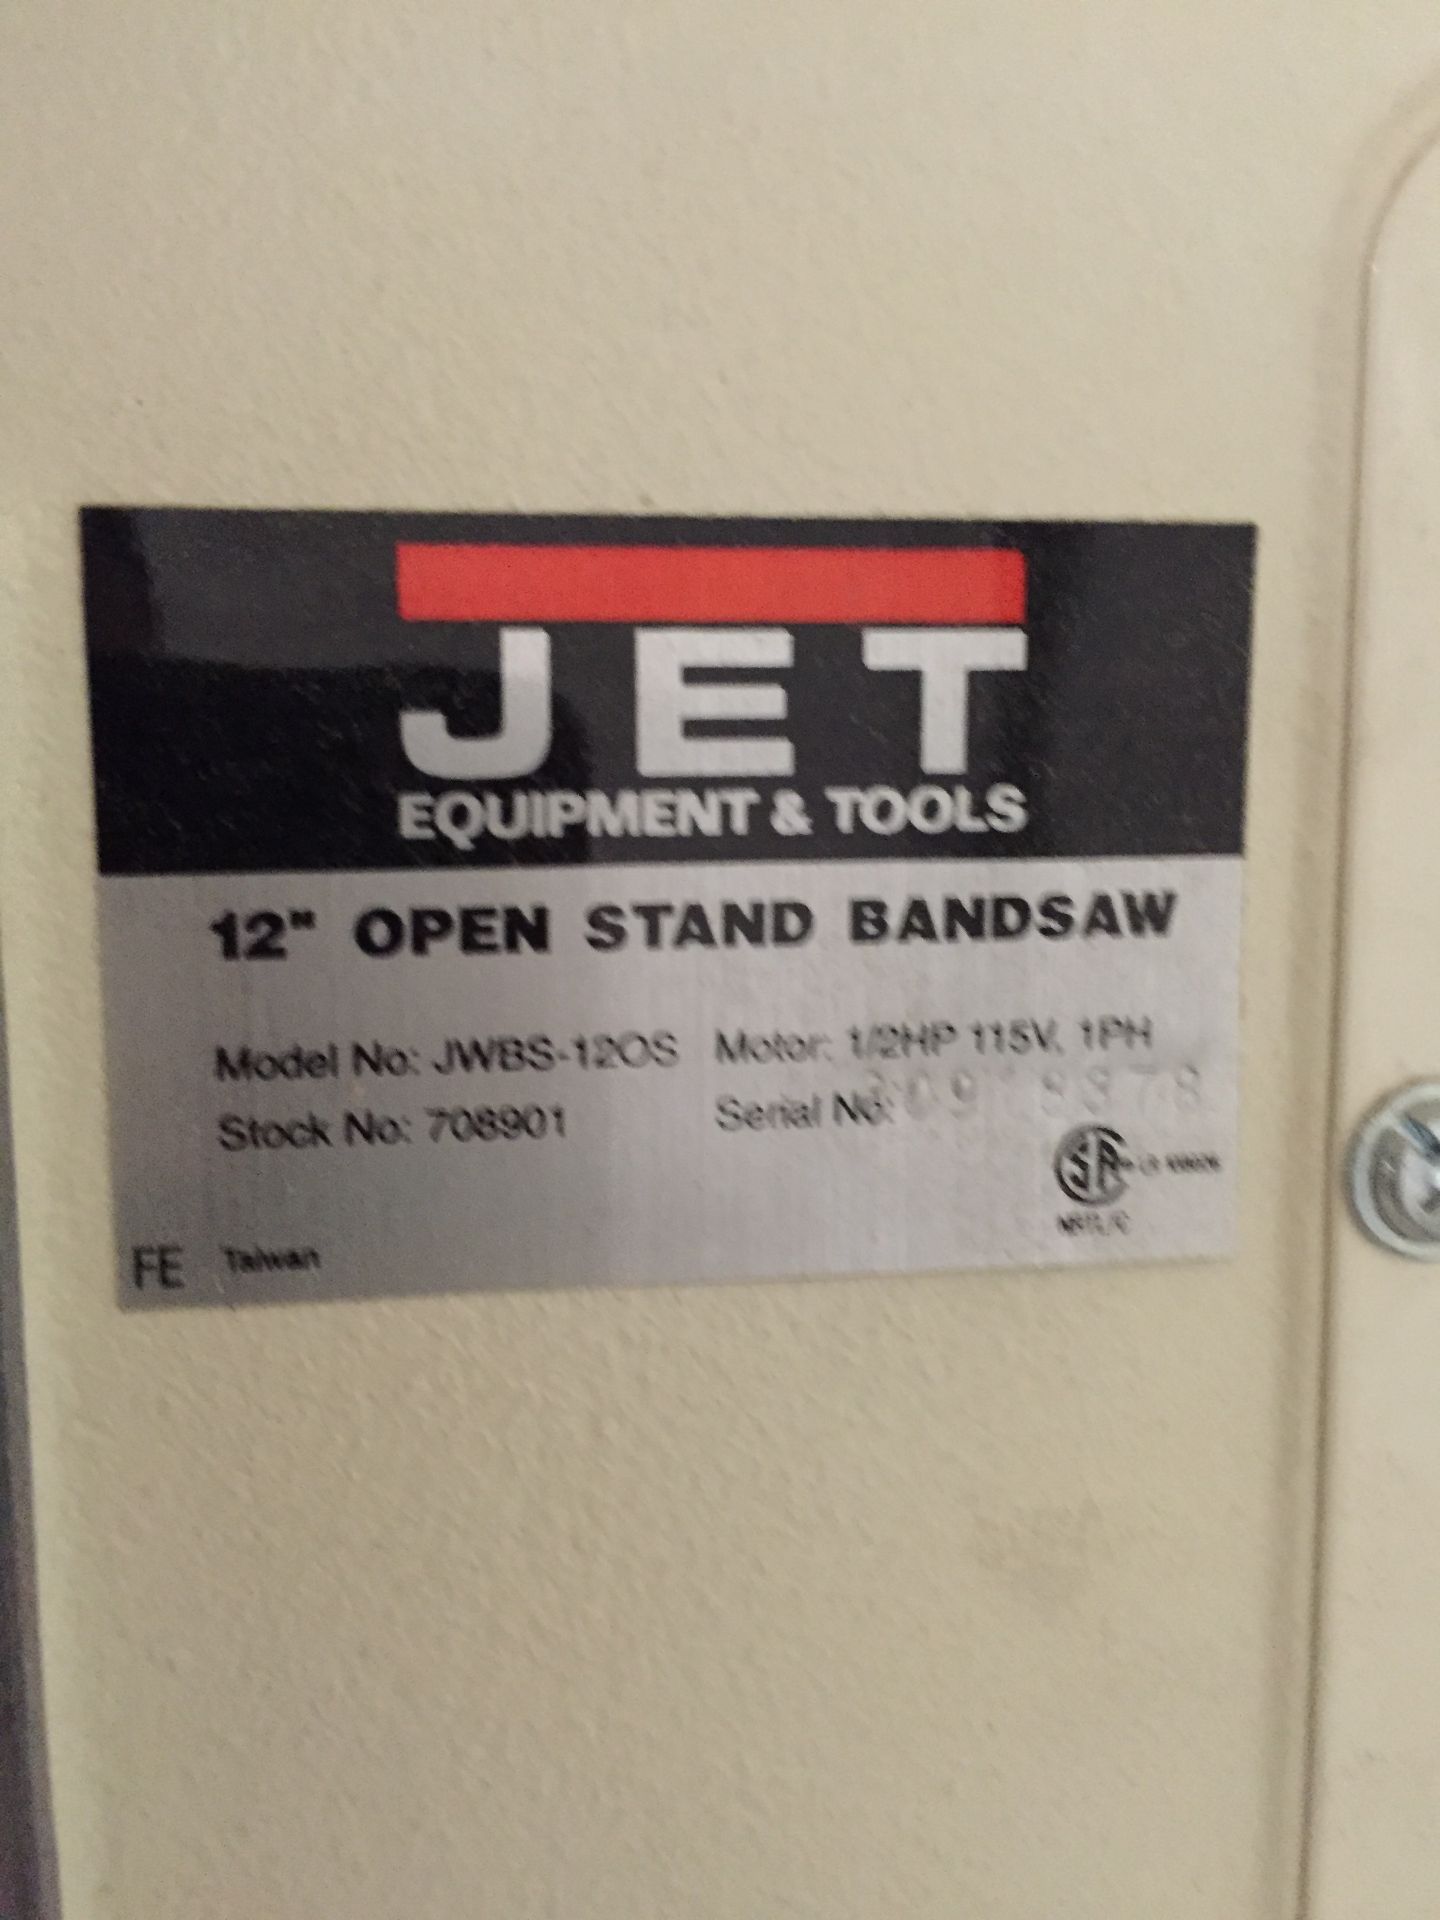 Jet 12" Vertical Band Saw M/N JWBS-120S, stock # 708901, with 24" X 36" wood dolly - Image 3 of 4